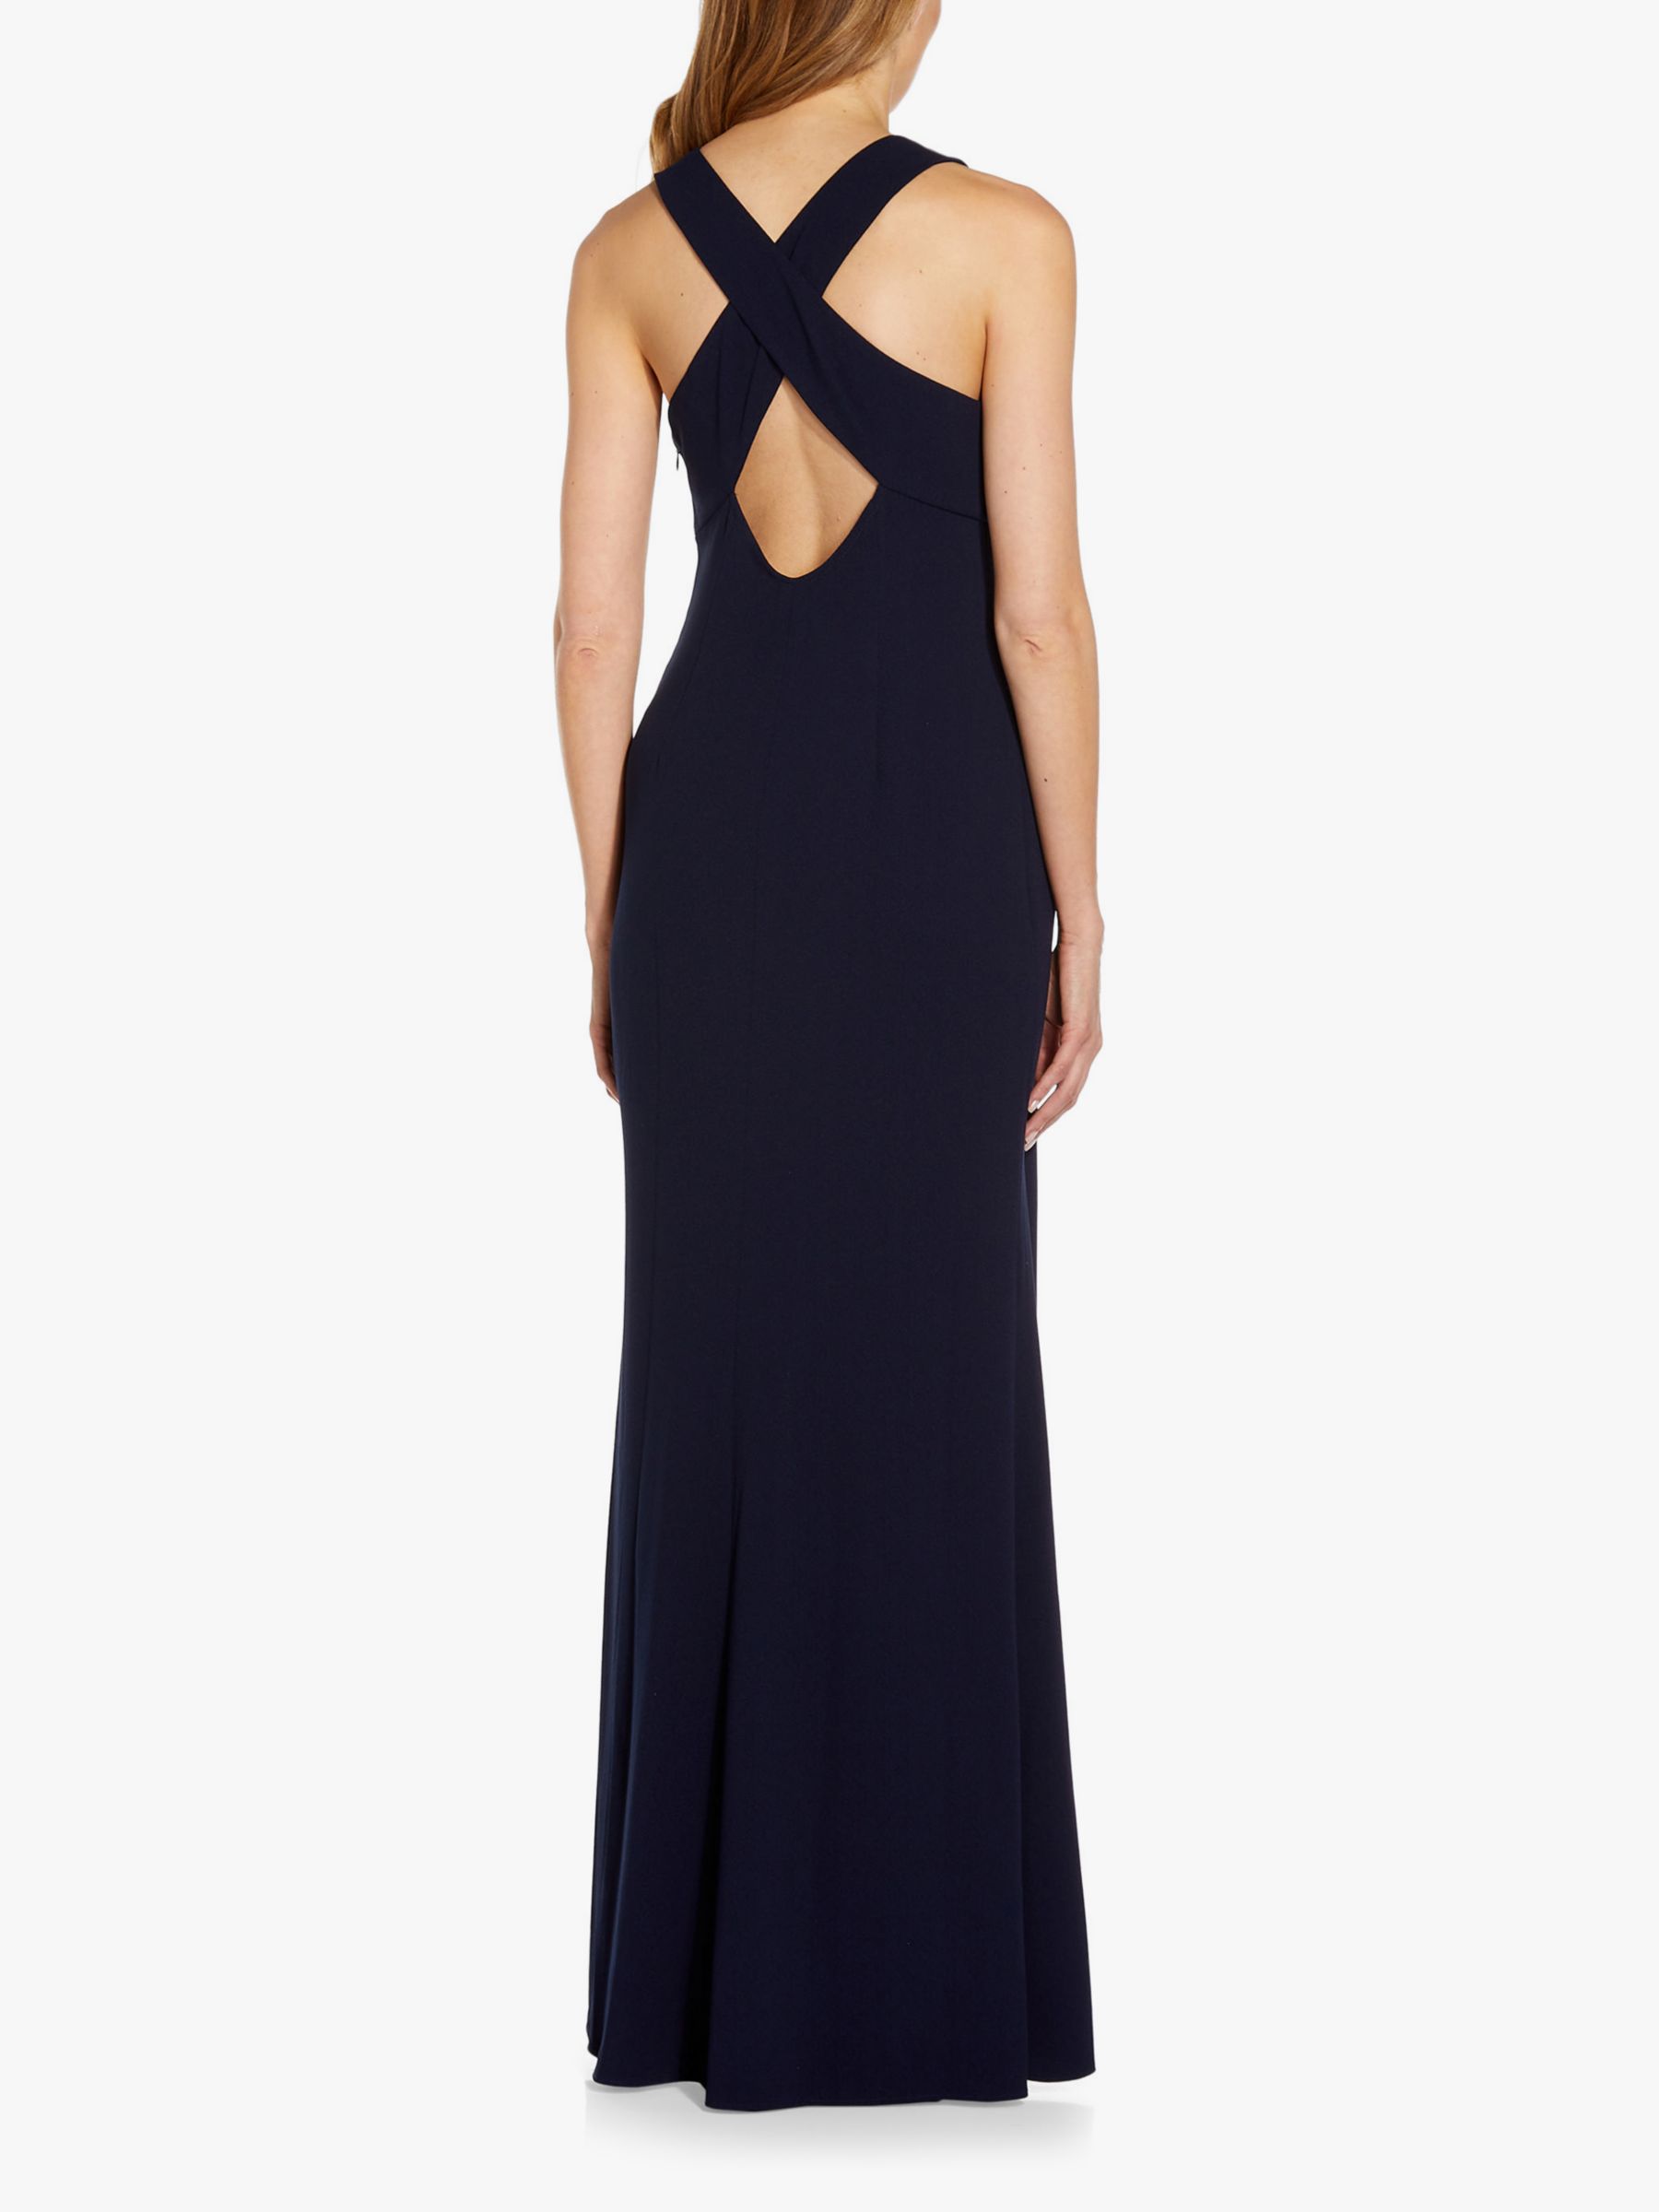 Adrianna Papell Cowl Neck Crepe Dress, Midnight at John Lewis & Partners